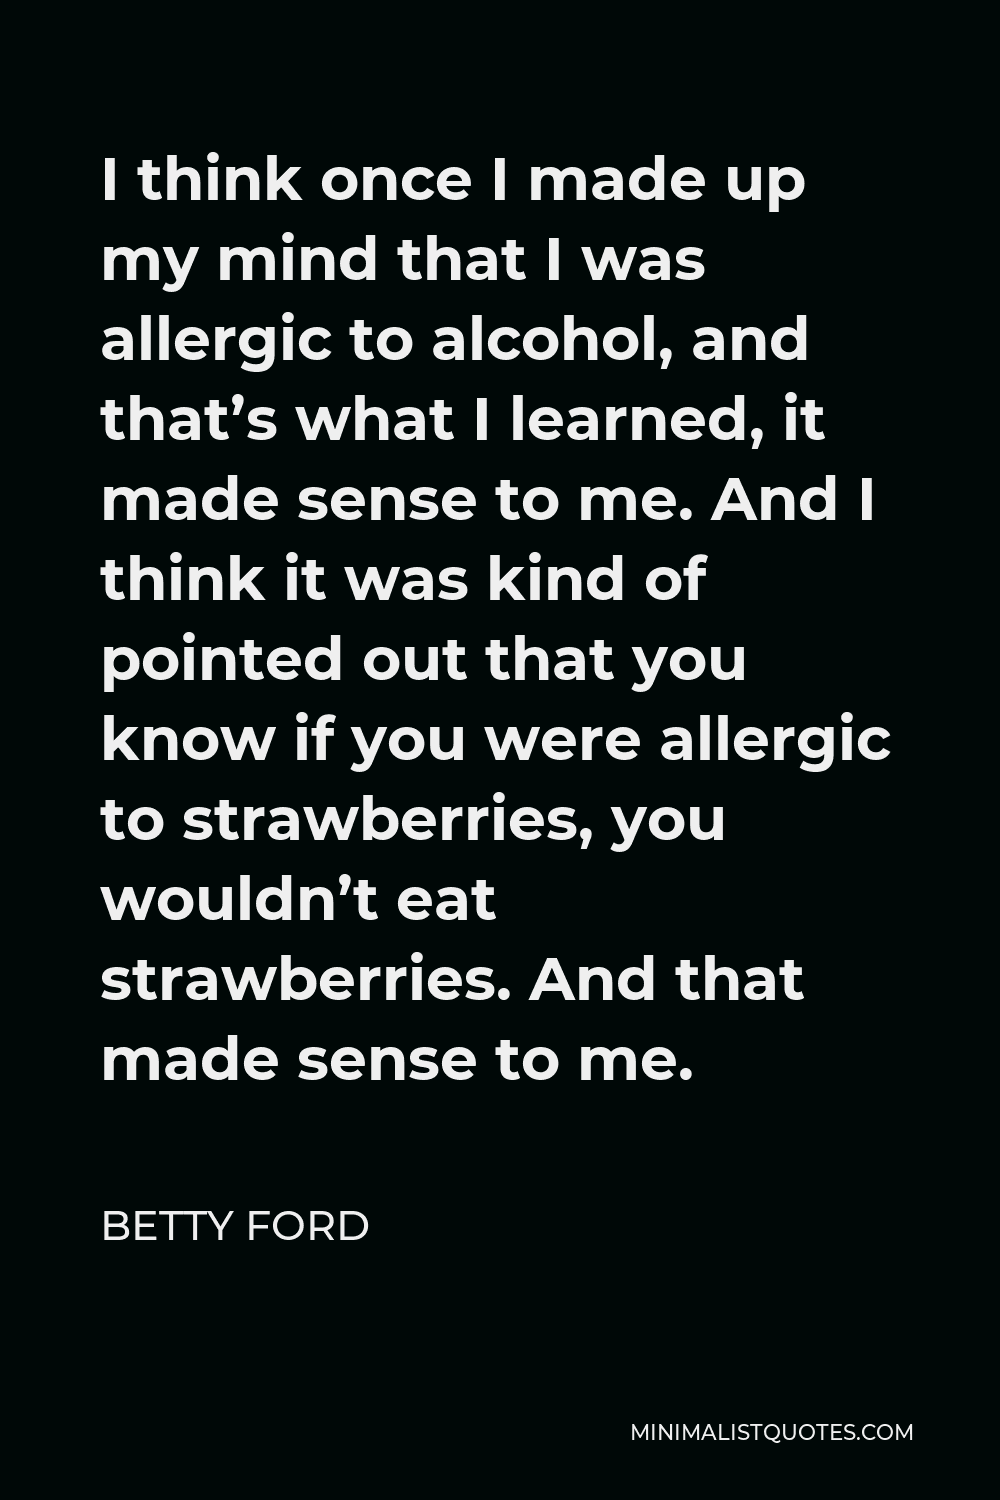 Betty Ford Quote - I think once I made up my mind that I was allergic to alcohol, and that’s what I learned, it made sense to me. And I think it was kind of pointed out that you know if you were allergic to strawberries, you wouldn’t eat strawberries. And that made sense to me.